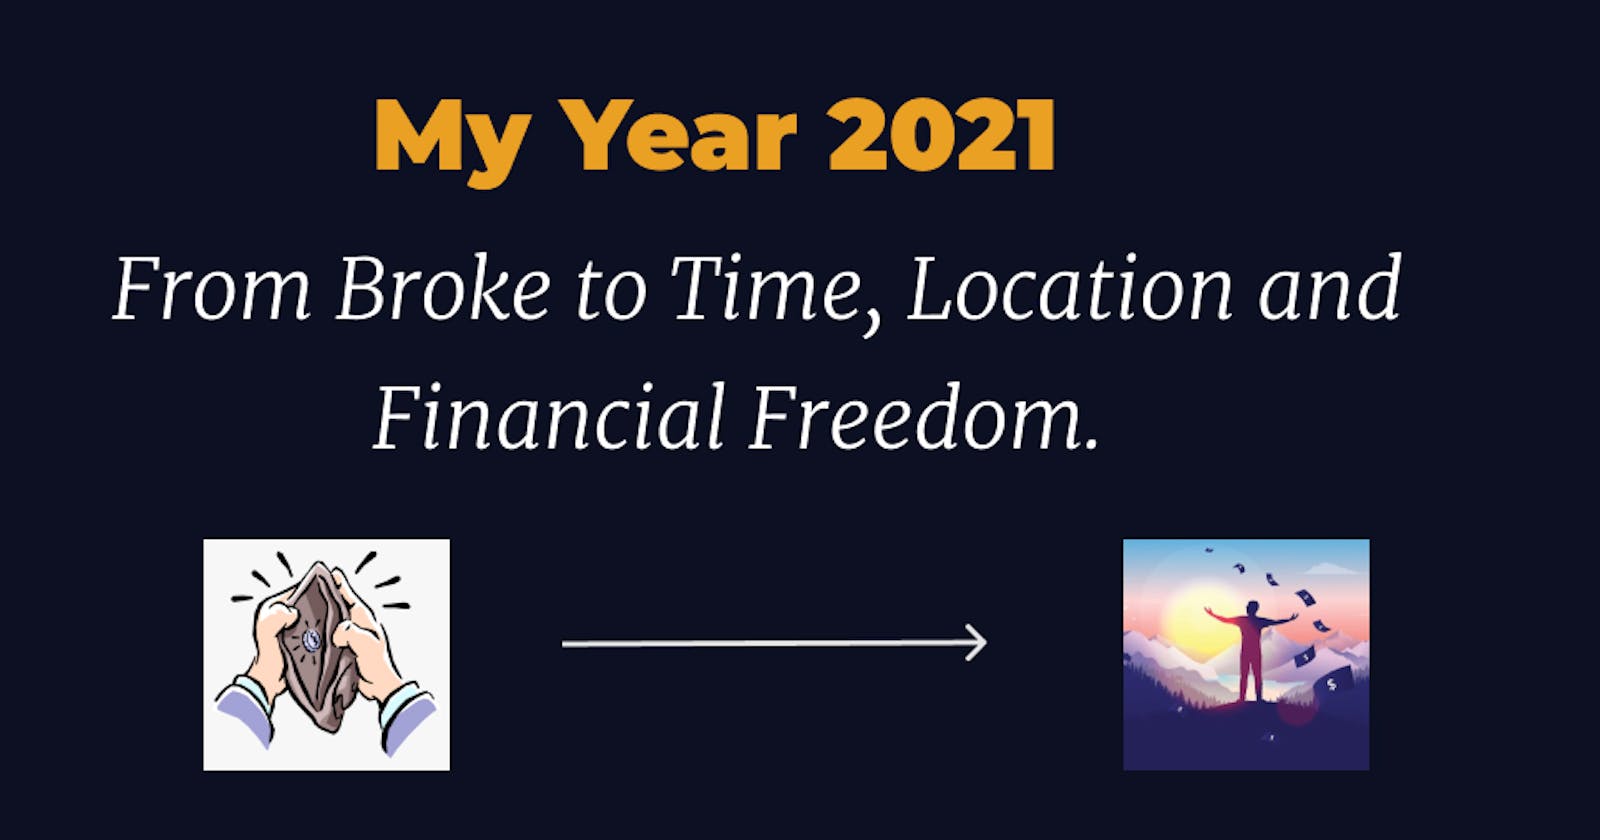 My Year 2021: From Broke to Time, Location, and Financial Freedom